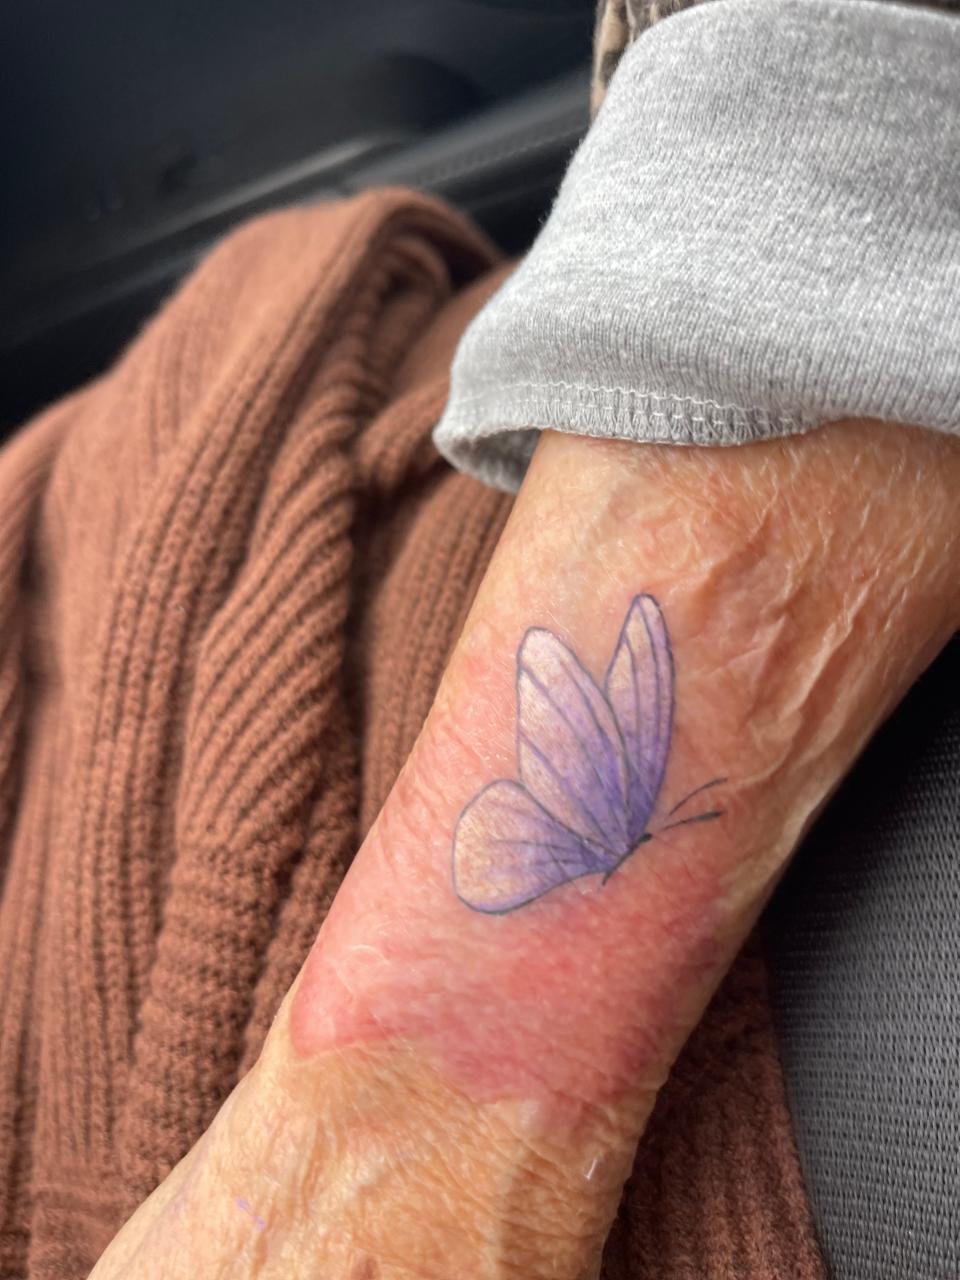 GennaSue Longshore of Victorville celebrated her 80th birthday by getting her first tattoo. The design she chose from Art Junkies Tattoo Studio was a purple butterfly.